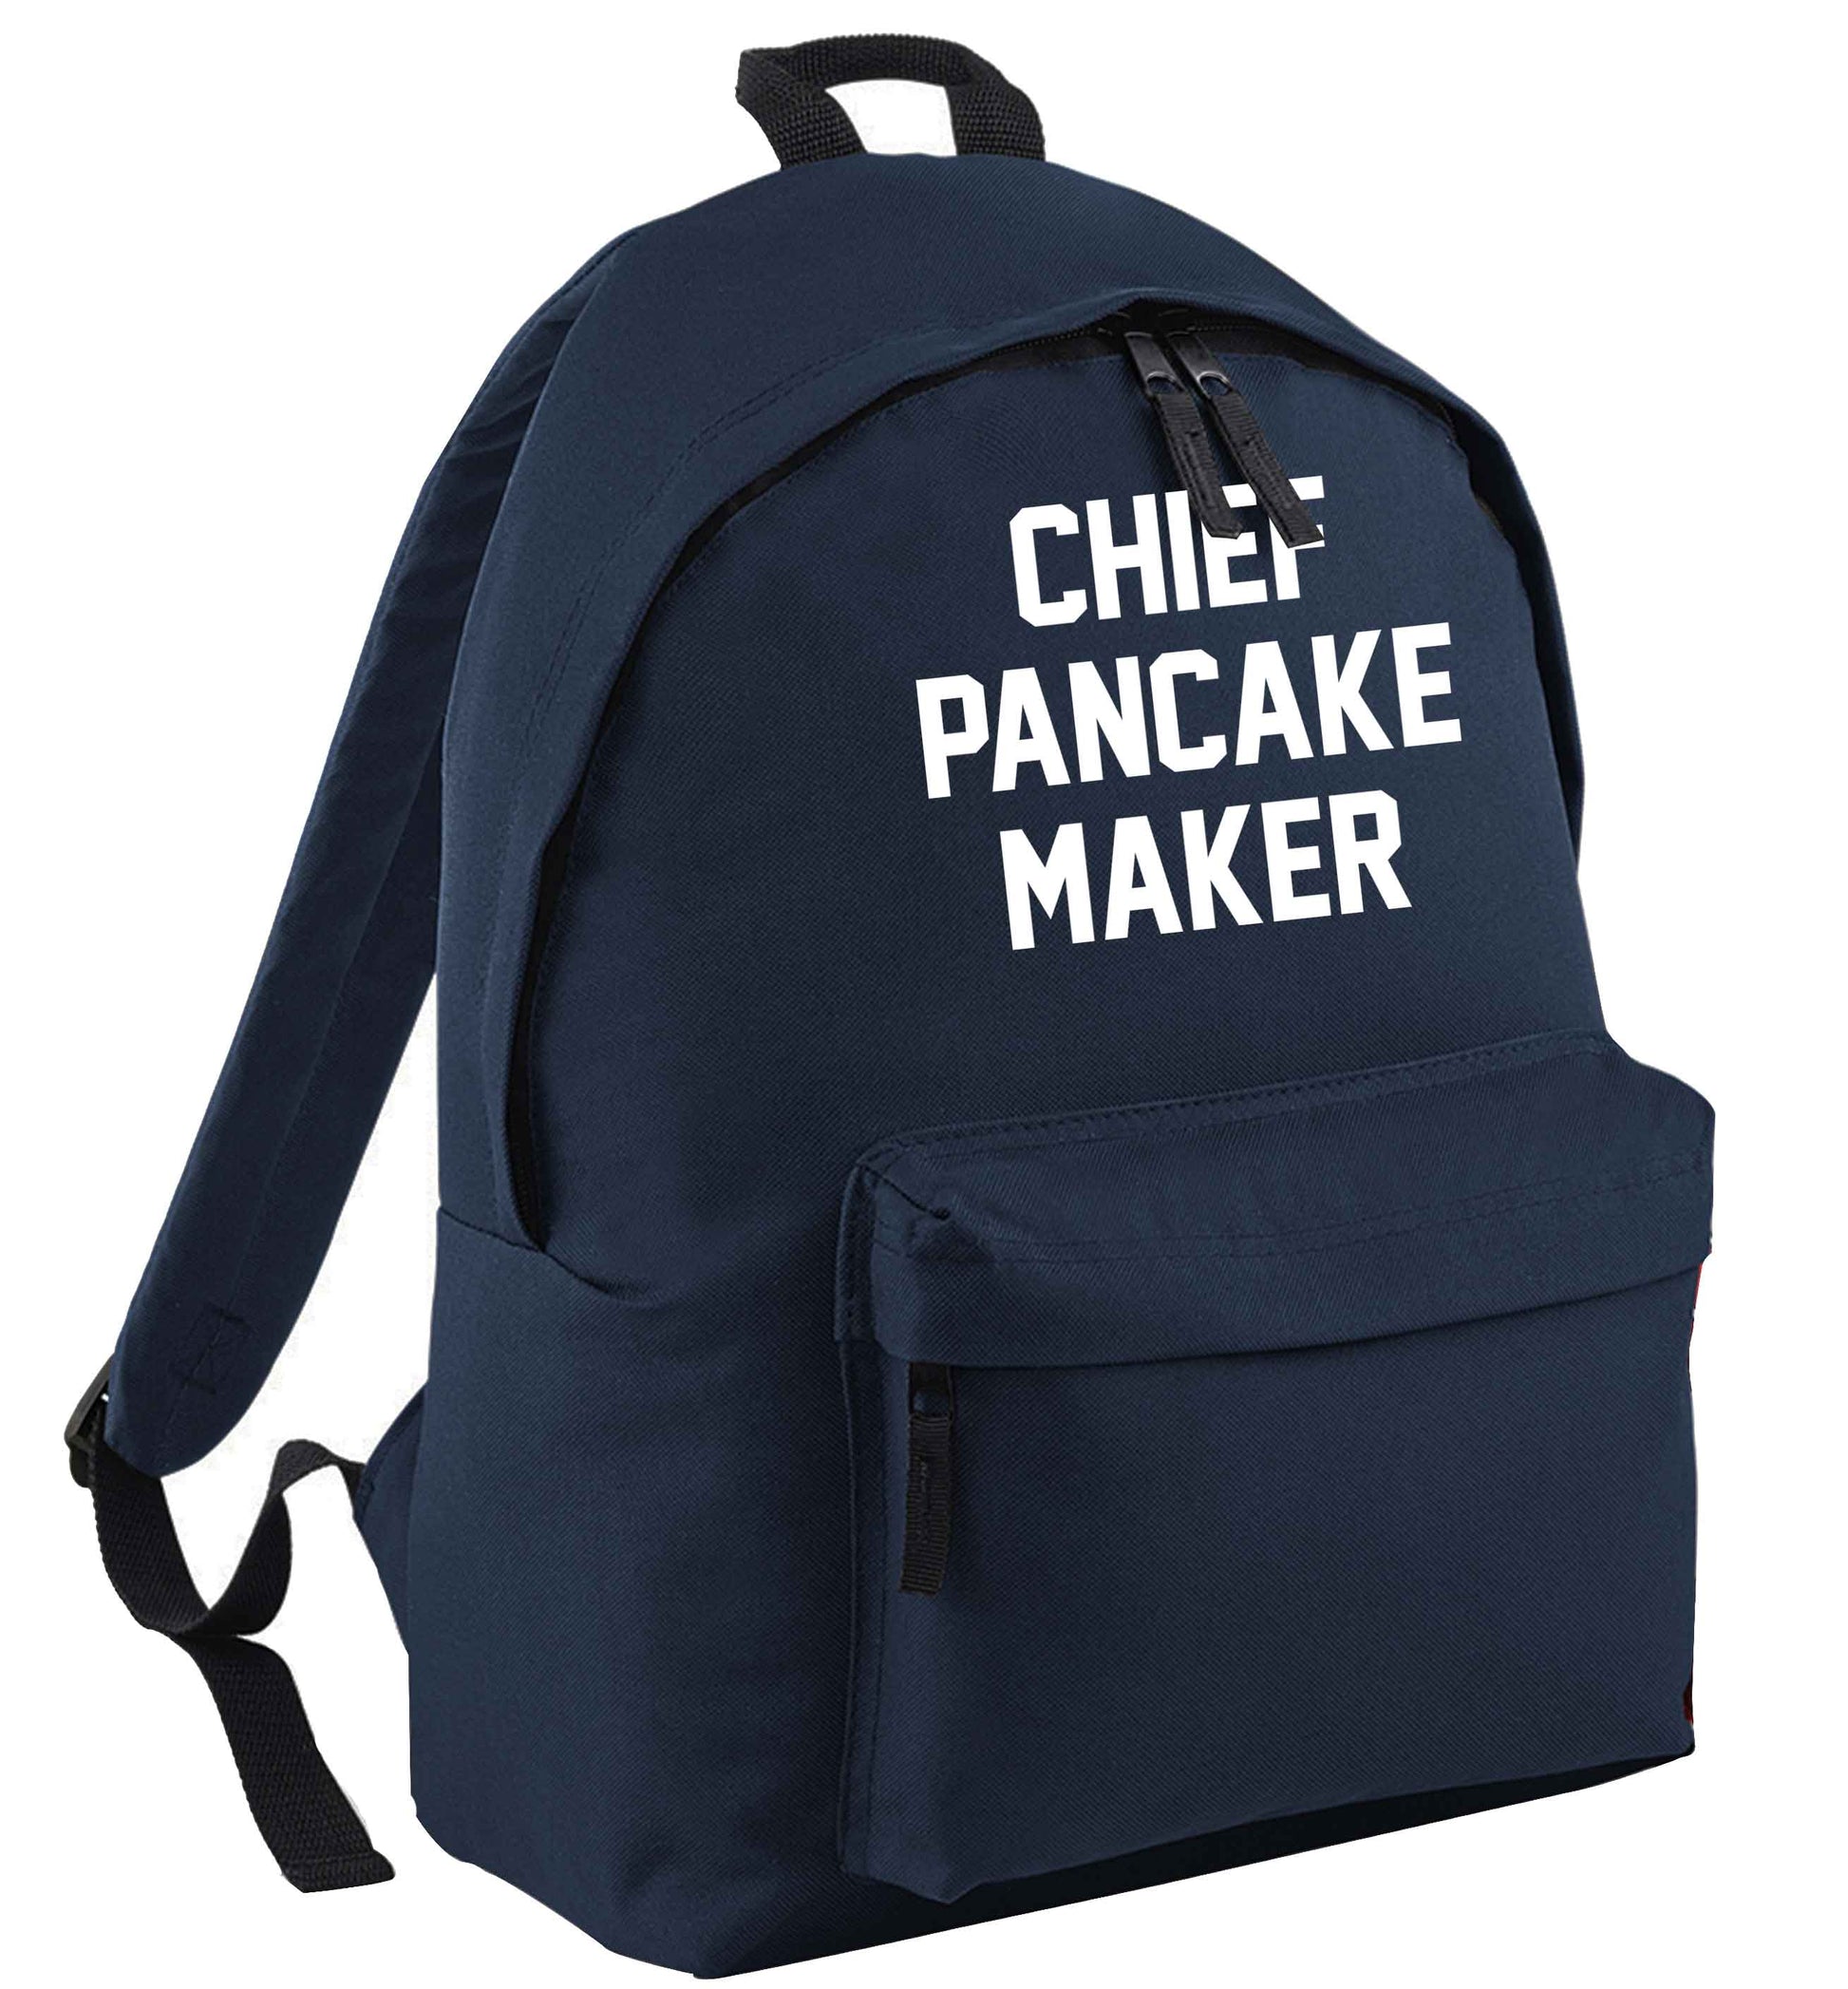 Chief pancake maker navy adults backpack